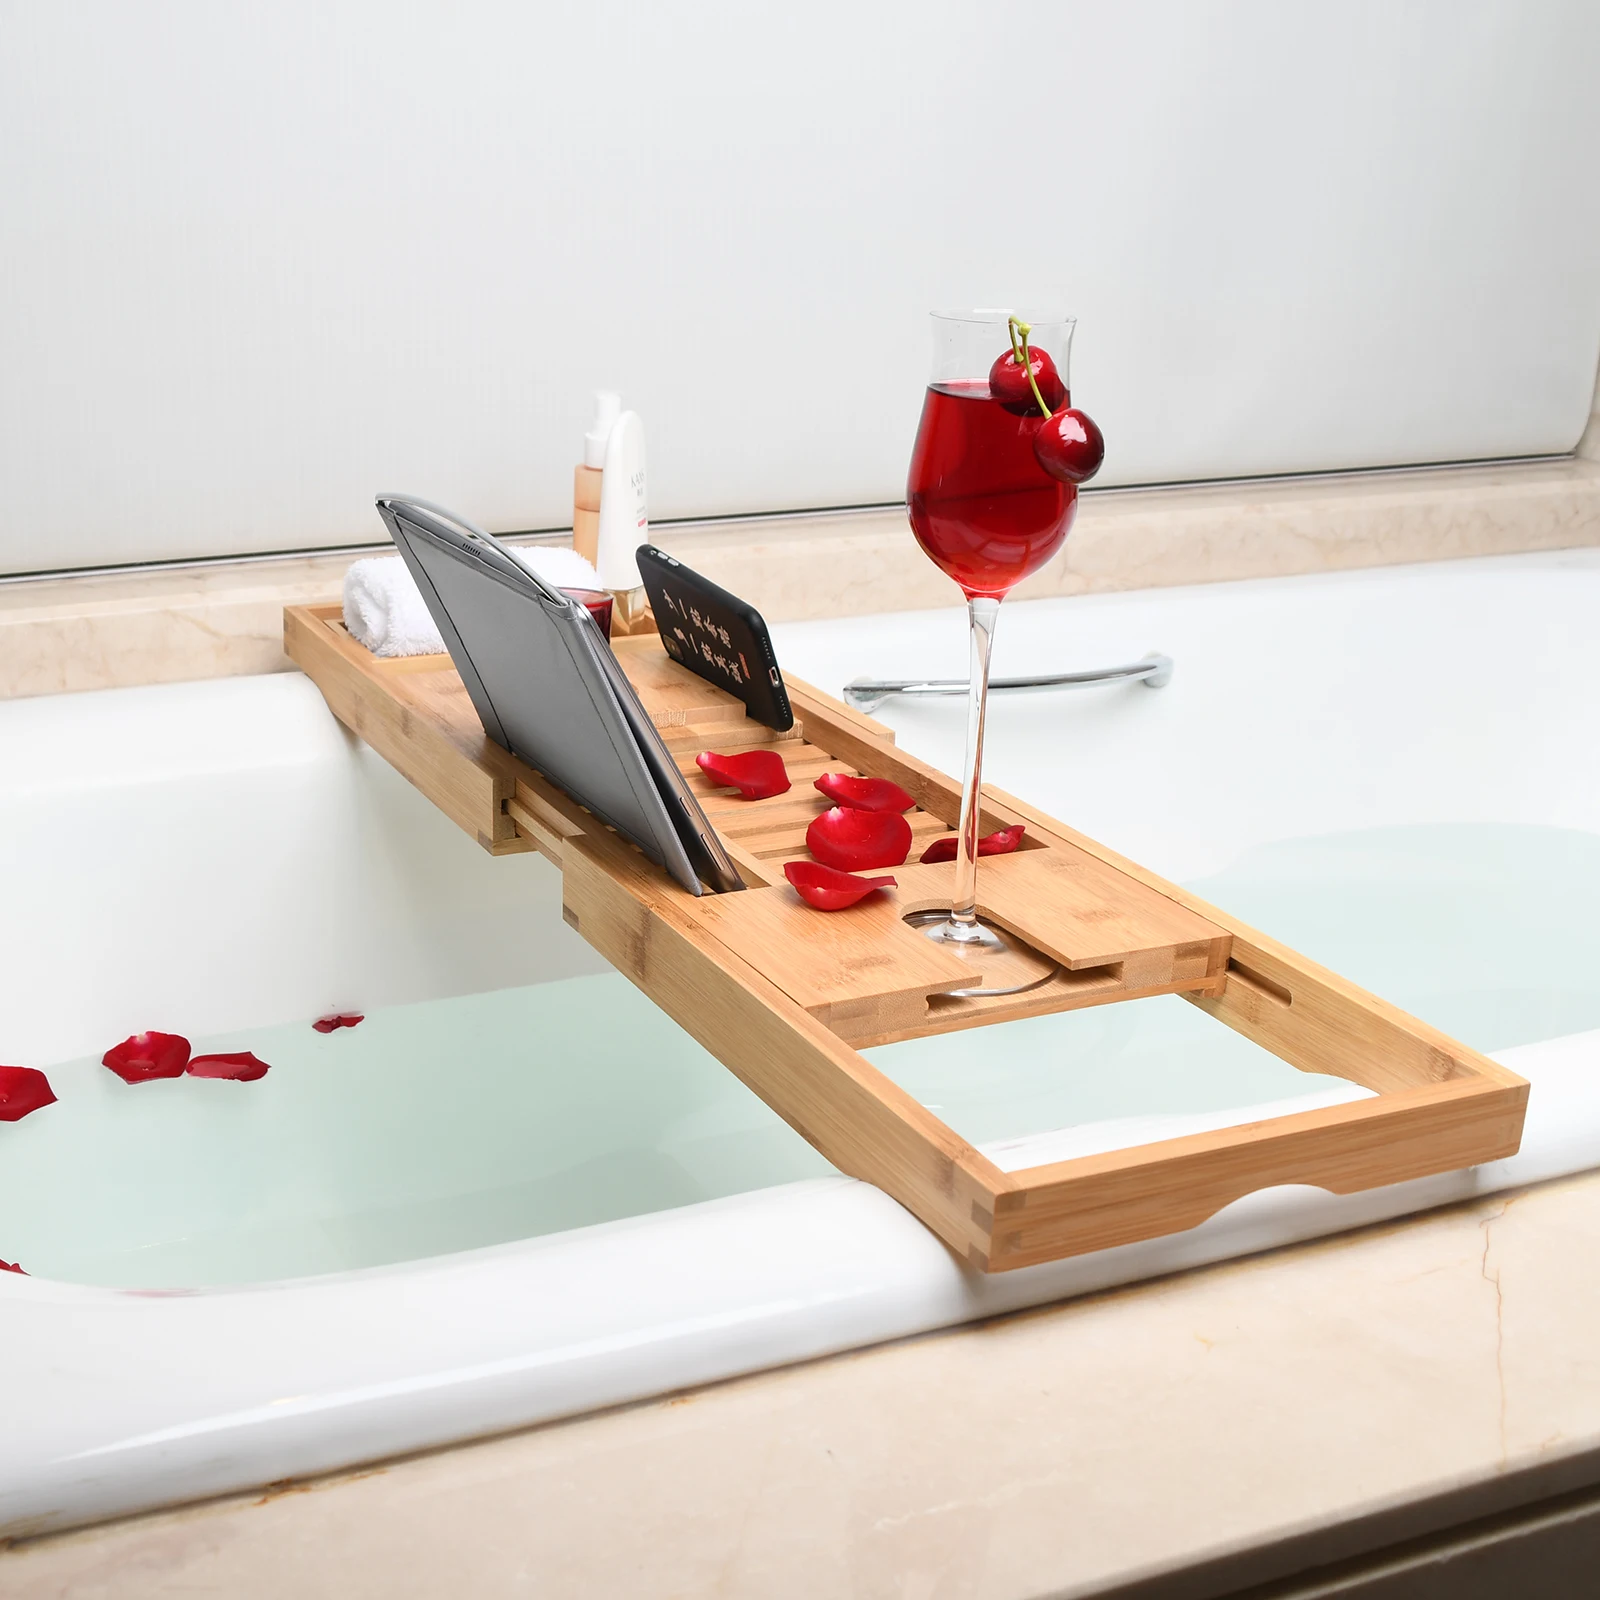 https://ae01.alicdn.com/kf/H201ba1725efe49208cce4ceb111d52f1o/Premium-Bamboo-Bathtub-Tray-Caddy-Wood-Bath-Tray-Expandable-with-Book-and-Holder-Gift-for-Loved.jpg